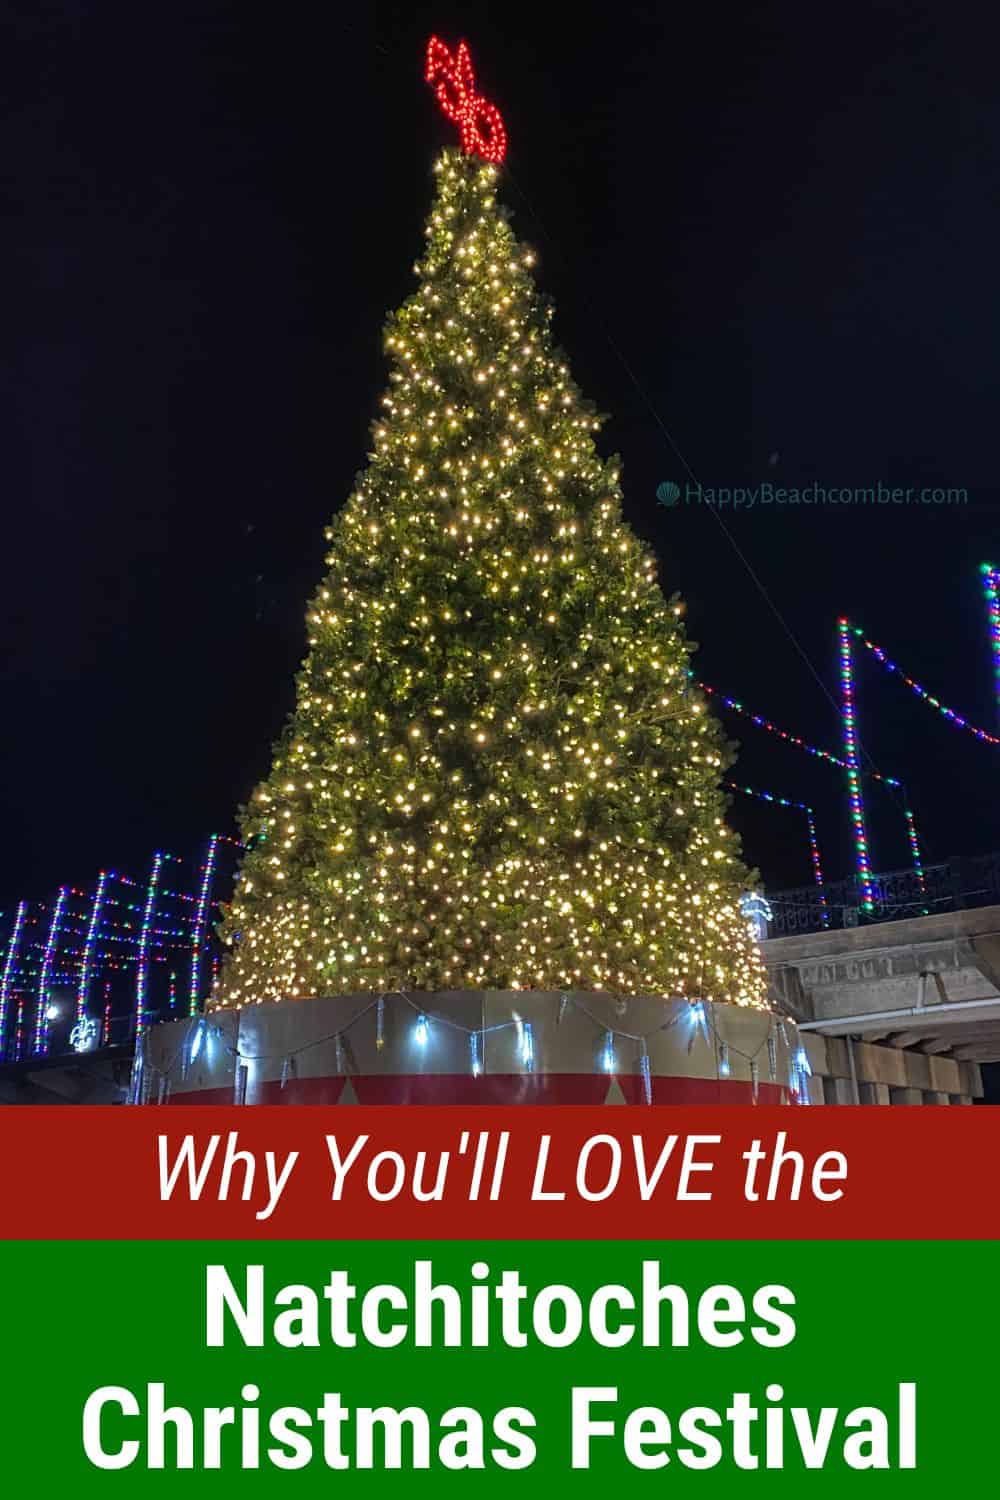 Why You'll Love the Natchitoches Christmas Festival